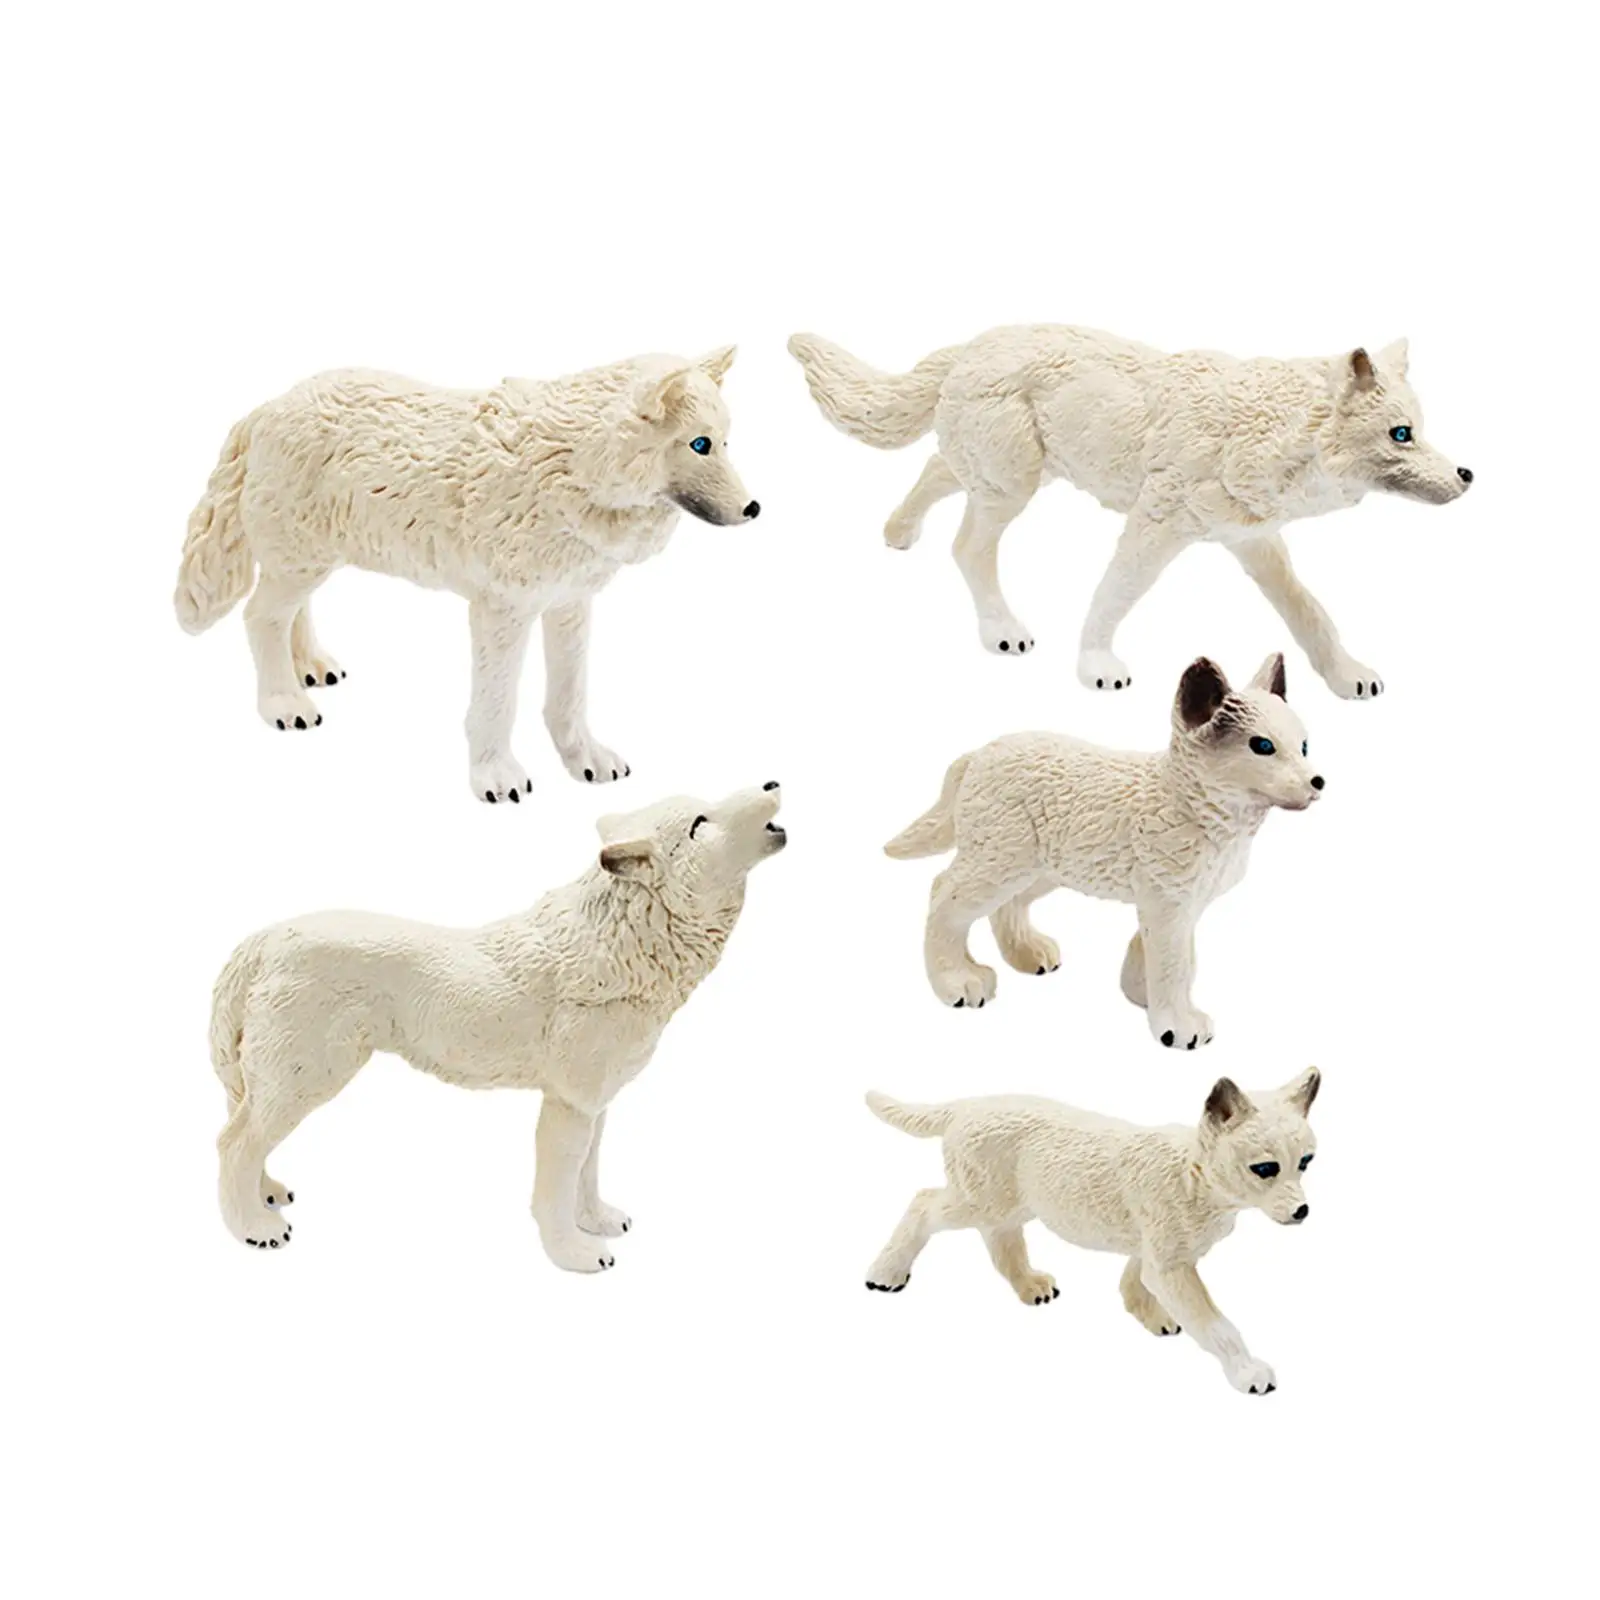 5Pcs Wolf Toy Figurines Realistic Wildlife Animal Statue for Educational Toys